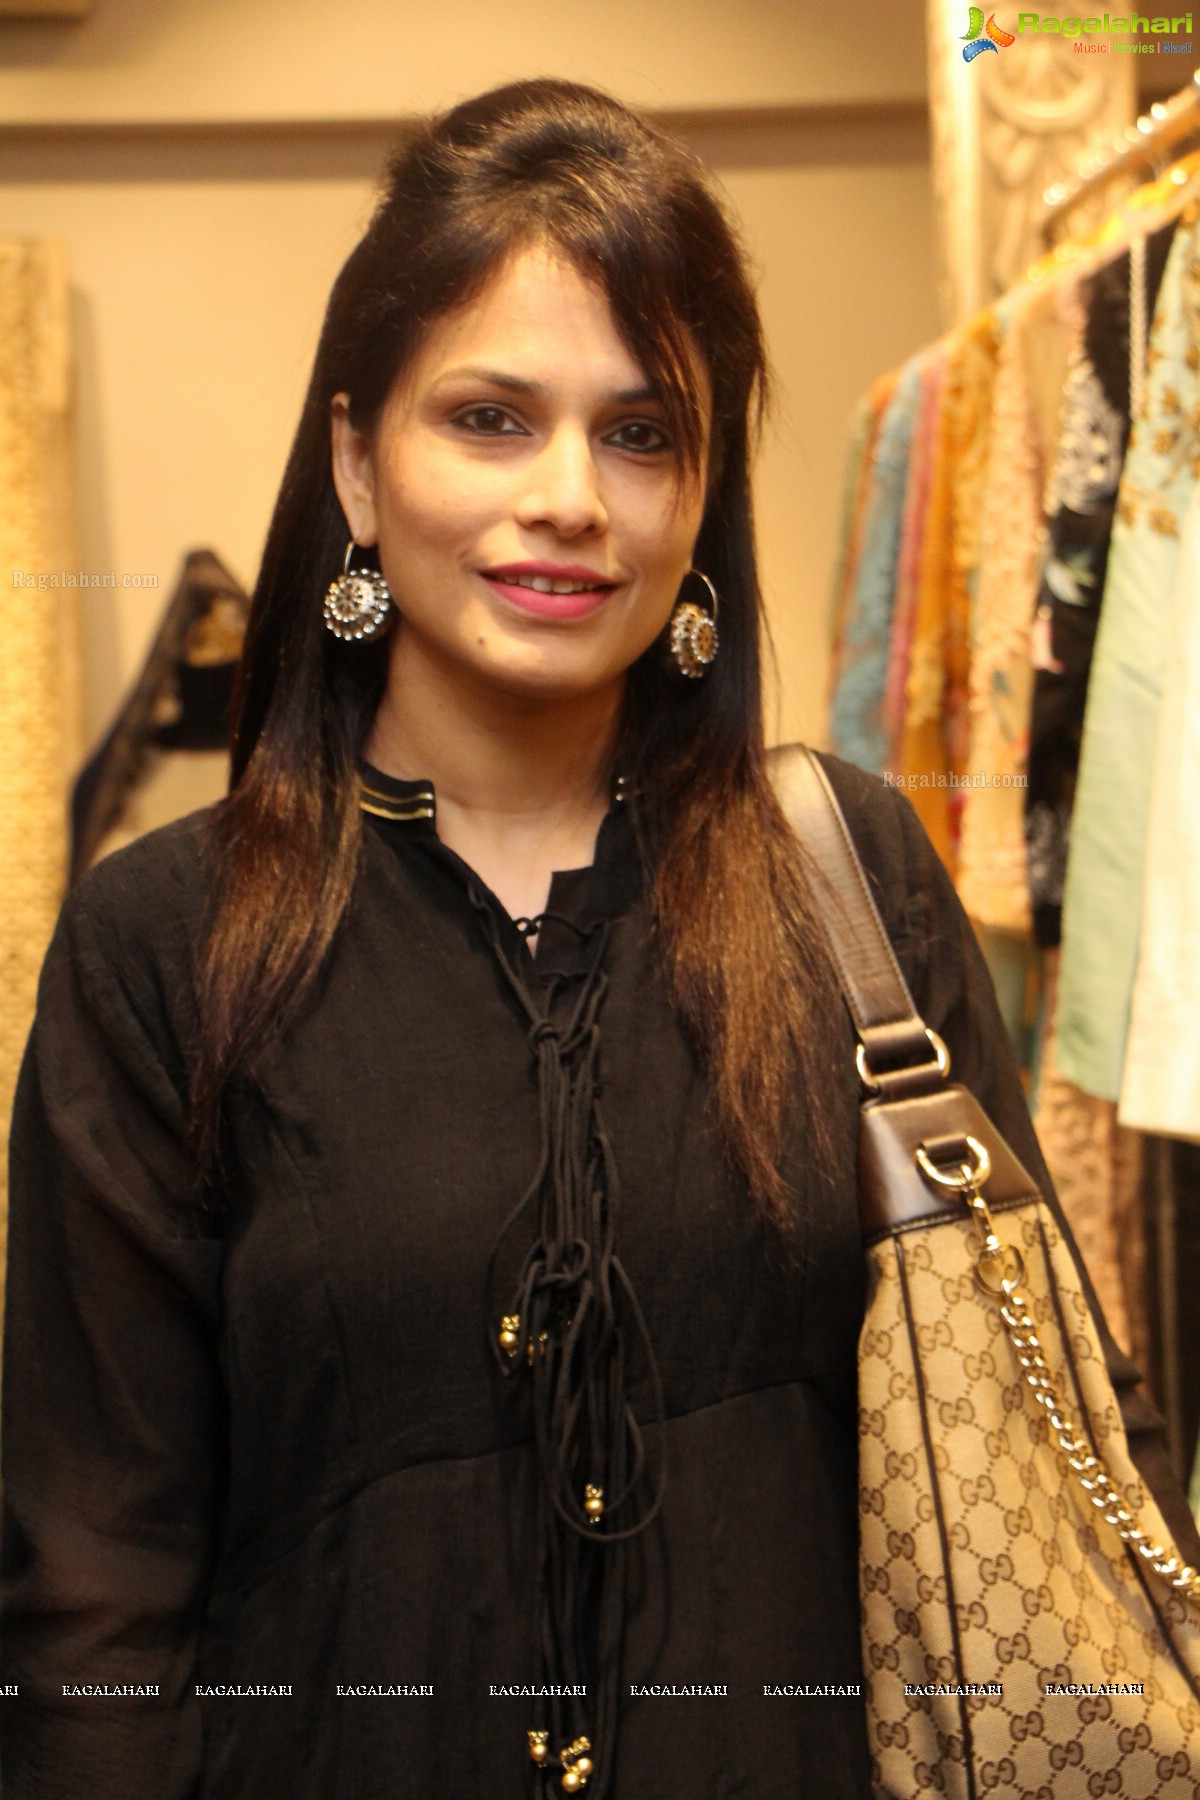 Archana Alok Jaju's Manomay Boutique Launch in Hyderabad